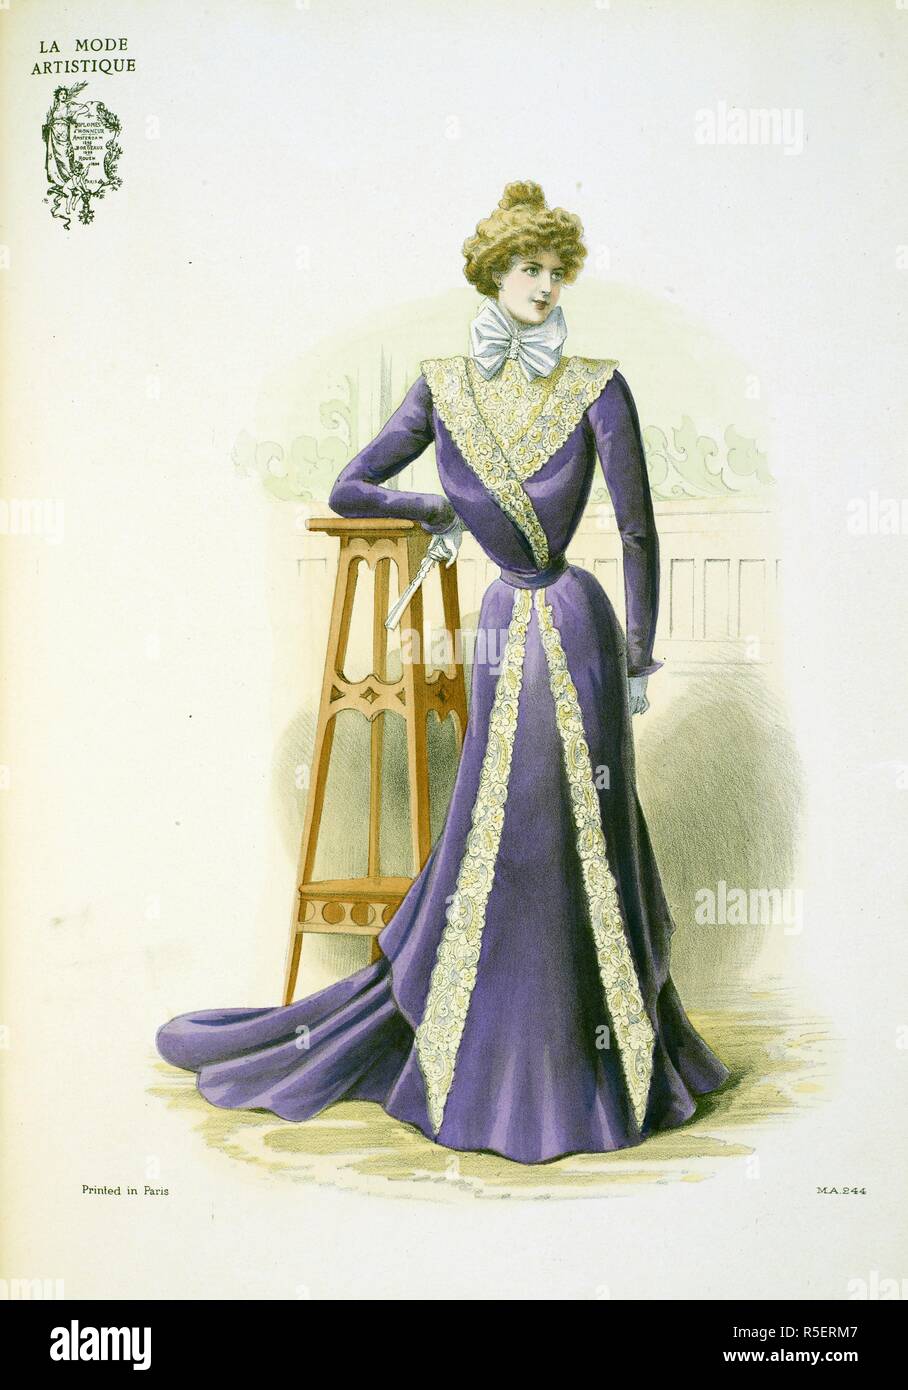 '...A graceful indoor toilette of grape-coloured velvet created by the Maison Honnet for the Comtesse de Ravenal. The skirt ... is cut up the front into a double tunic which falls in long points and is edged with guipre de Venise... At the thoat is a dainty cravat of tulle, clasped with a diamond buckle. This model is the real robe d'intÃ©rieur as distinct from the tea-gown with which it is often confounded. . The Powder Puff [An English edition of 'La Mode artistique'.; 1898]. (London, England : 1898). Source: The Powder Puff. Christmas, plate 244. Stock Photo